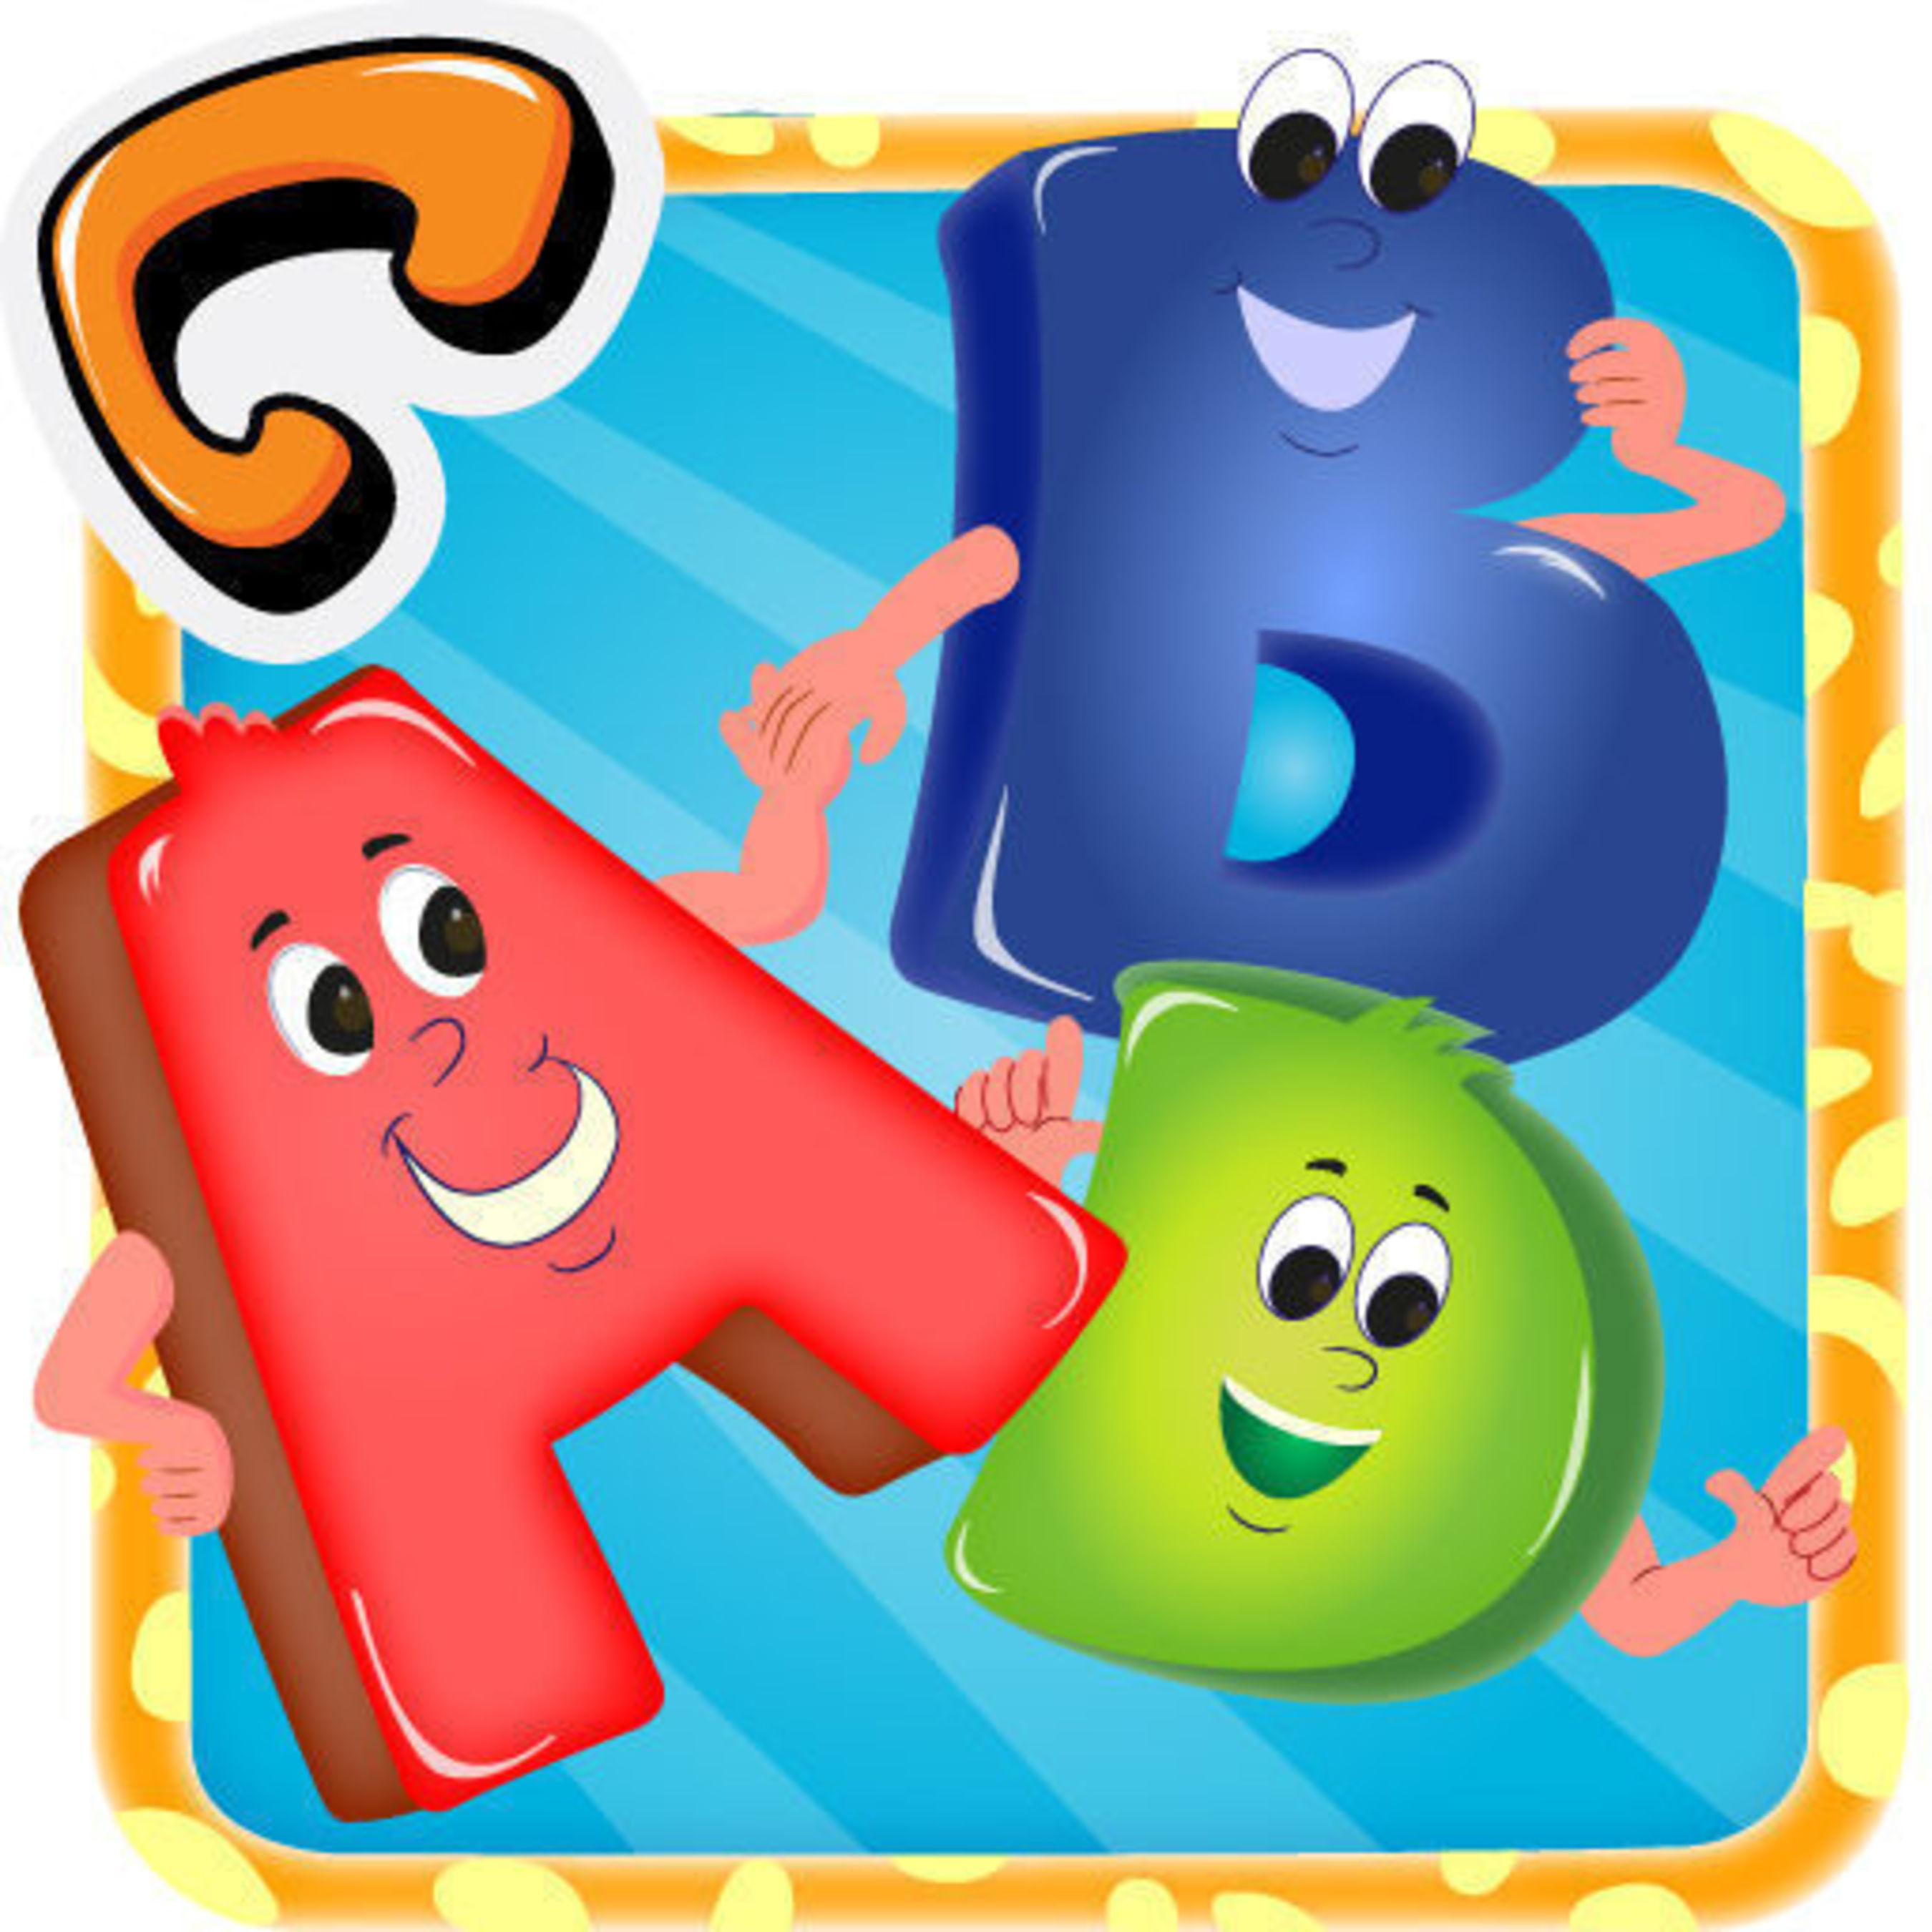 Trending Now on Apple - Chifro ABC : Kids Alphabet Game